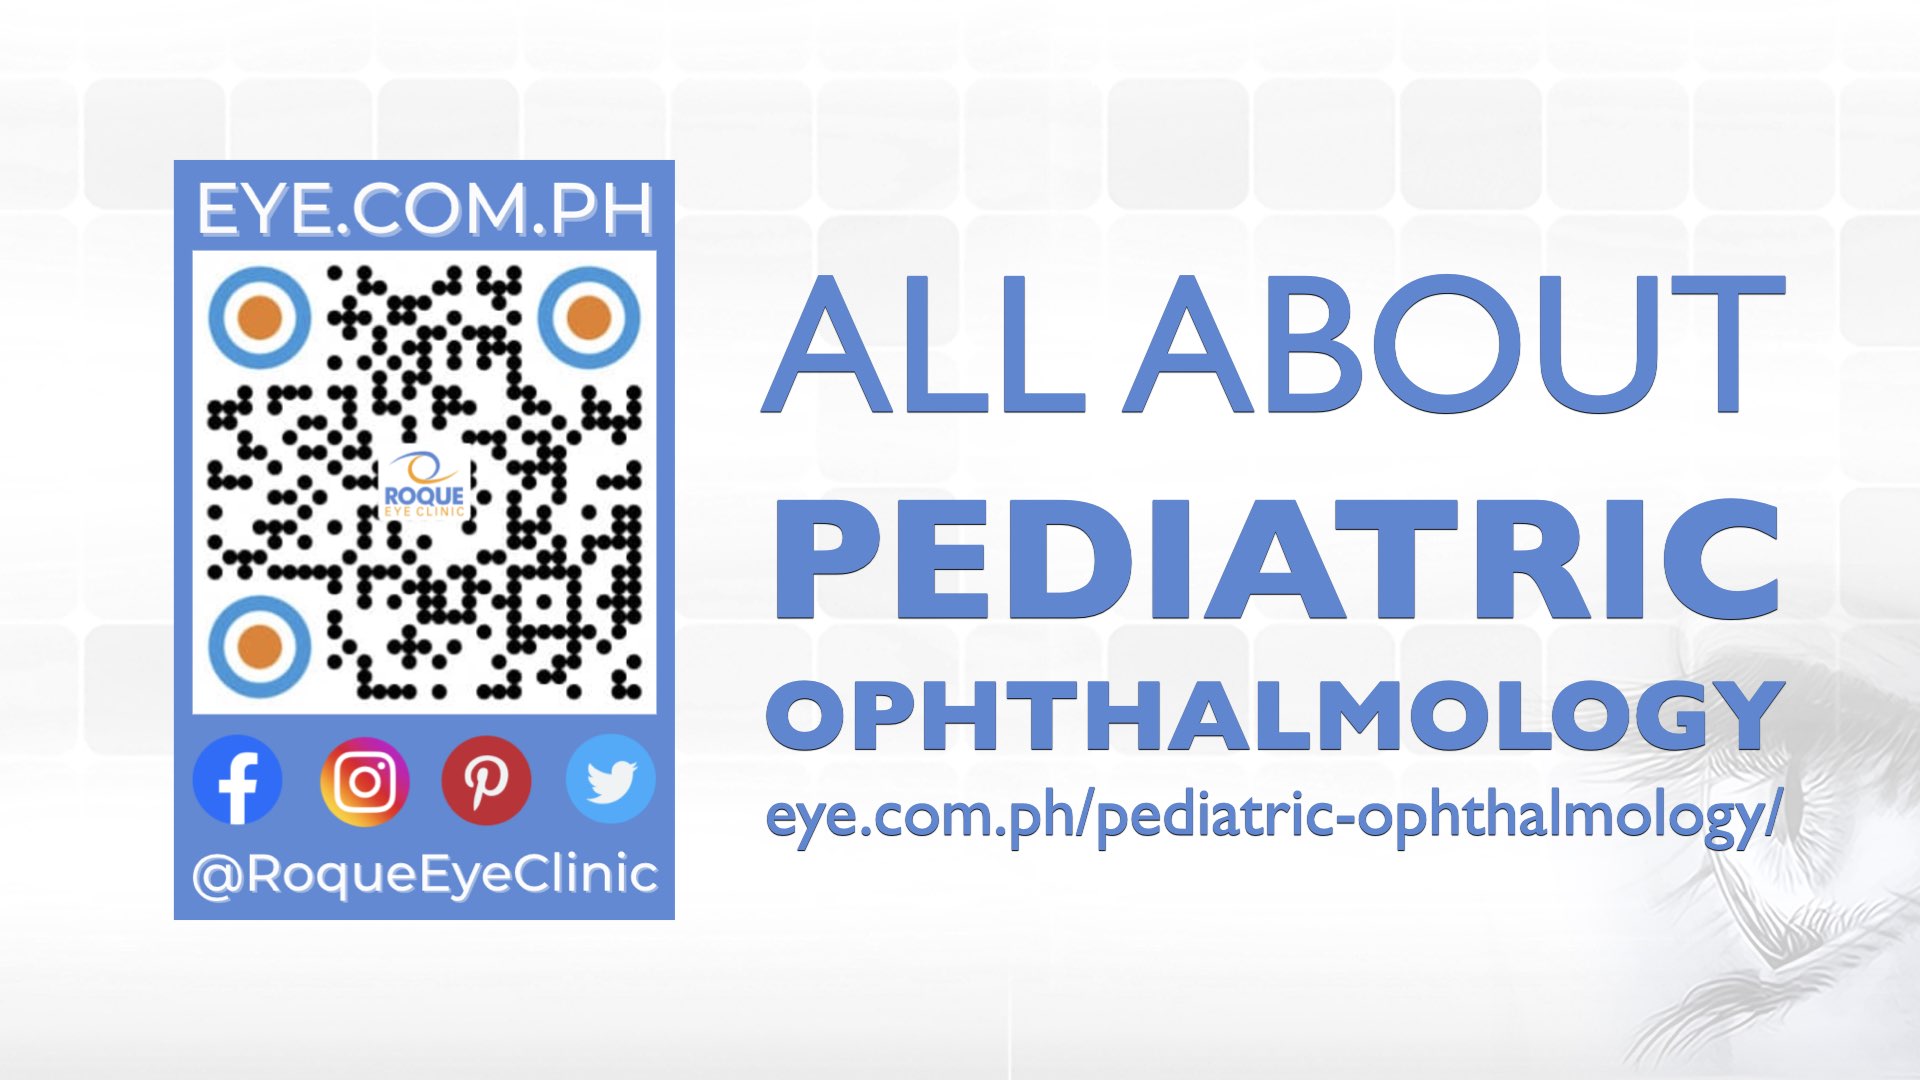 All About Pediatric Ophthalmology